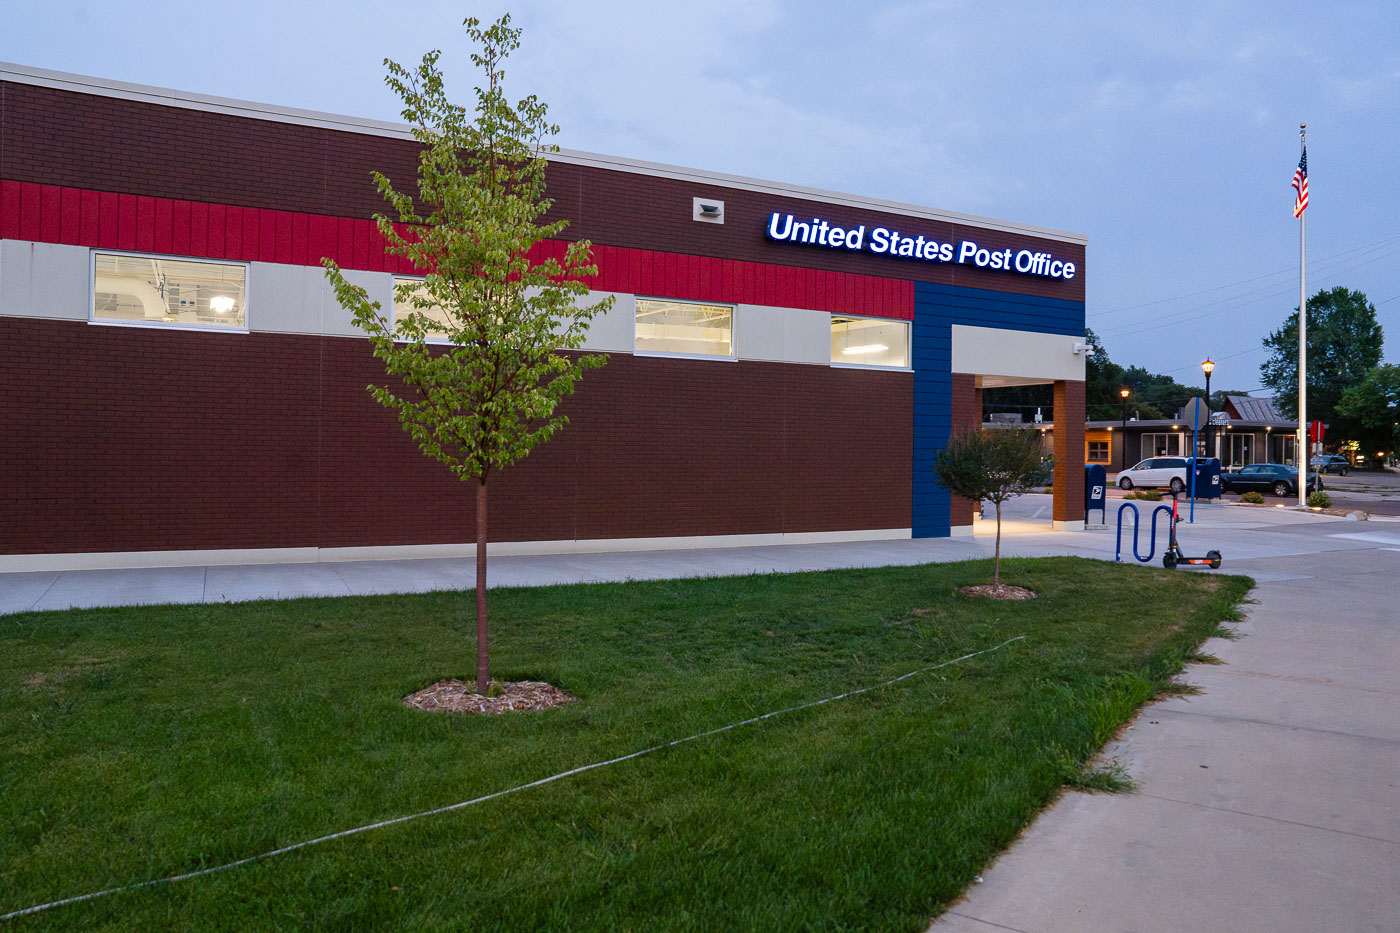 The rebuilt post office near the burned Minneapolis police third precinct. It replaced the post office that was burned down during riots following the murder of George Floyd.